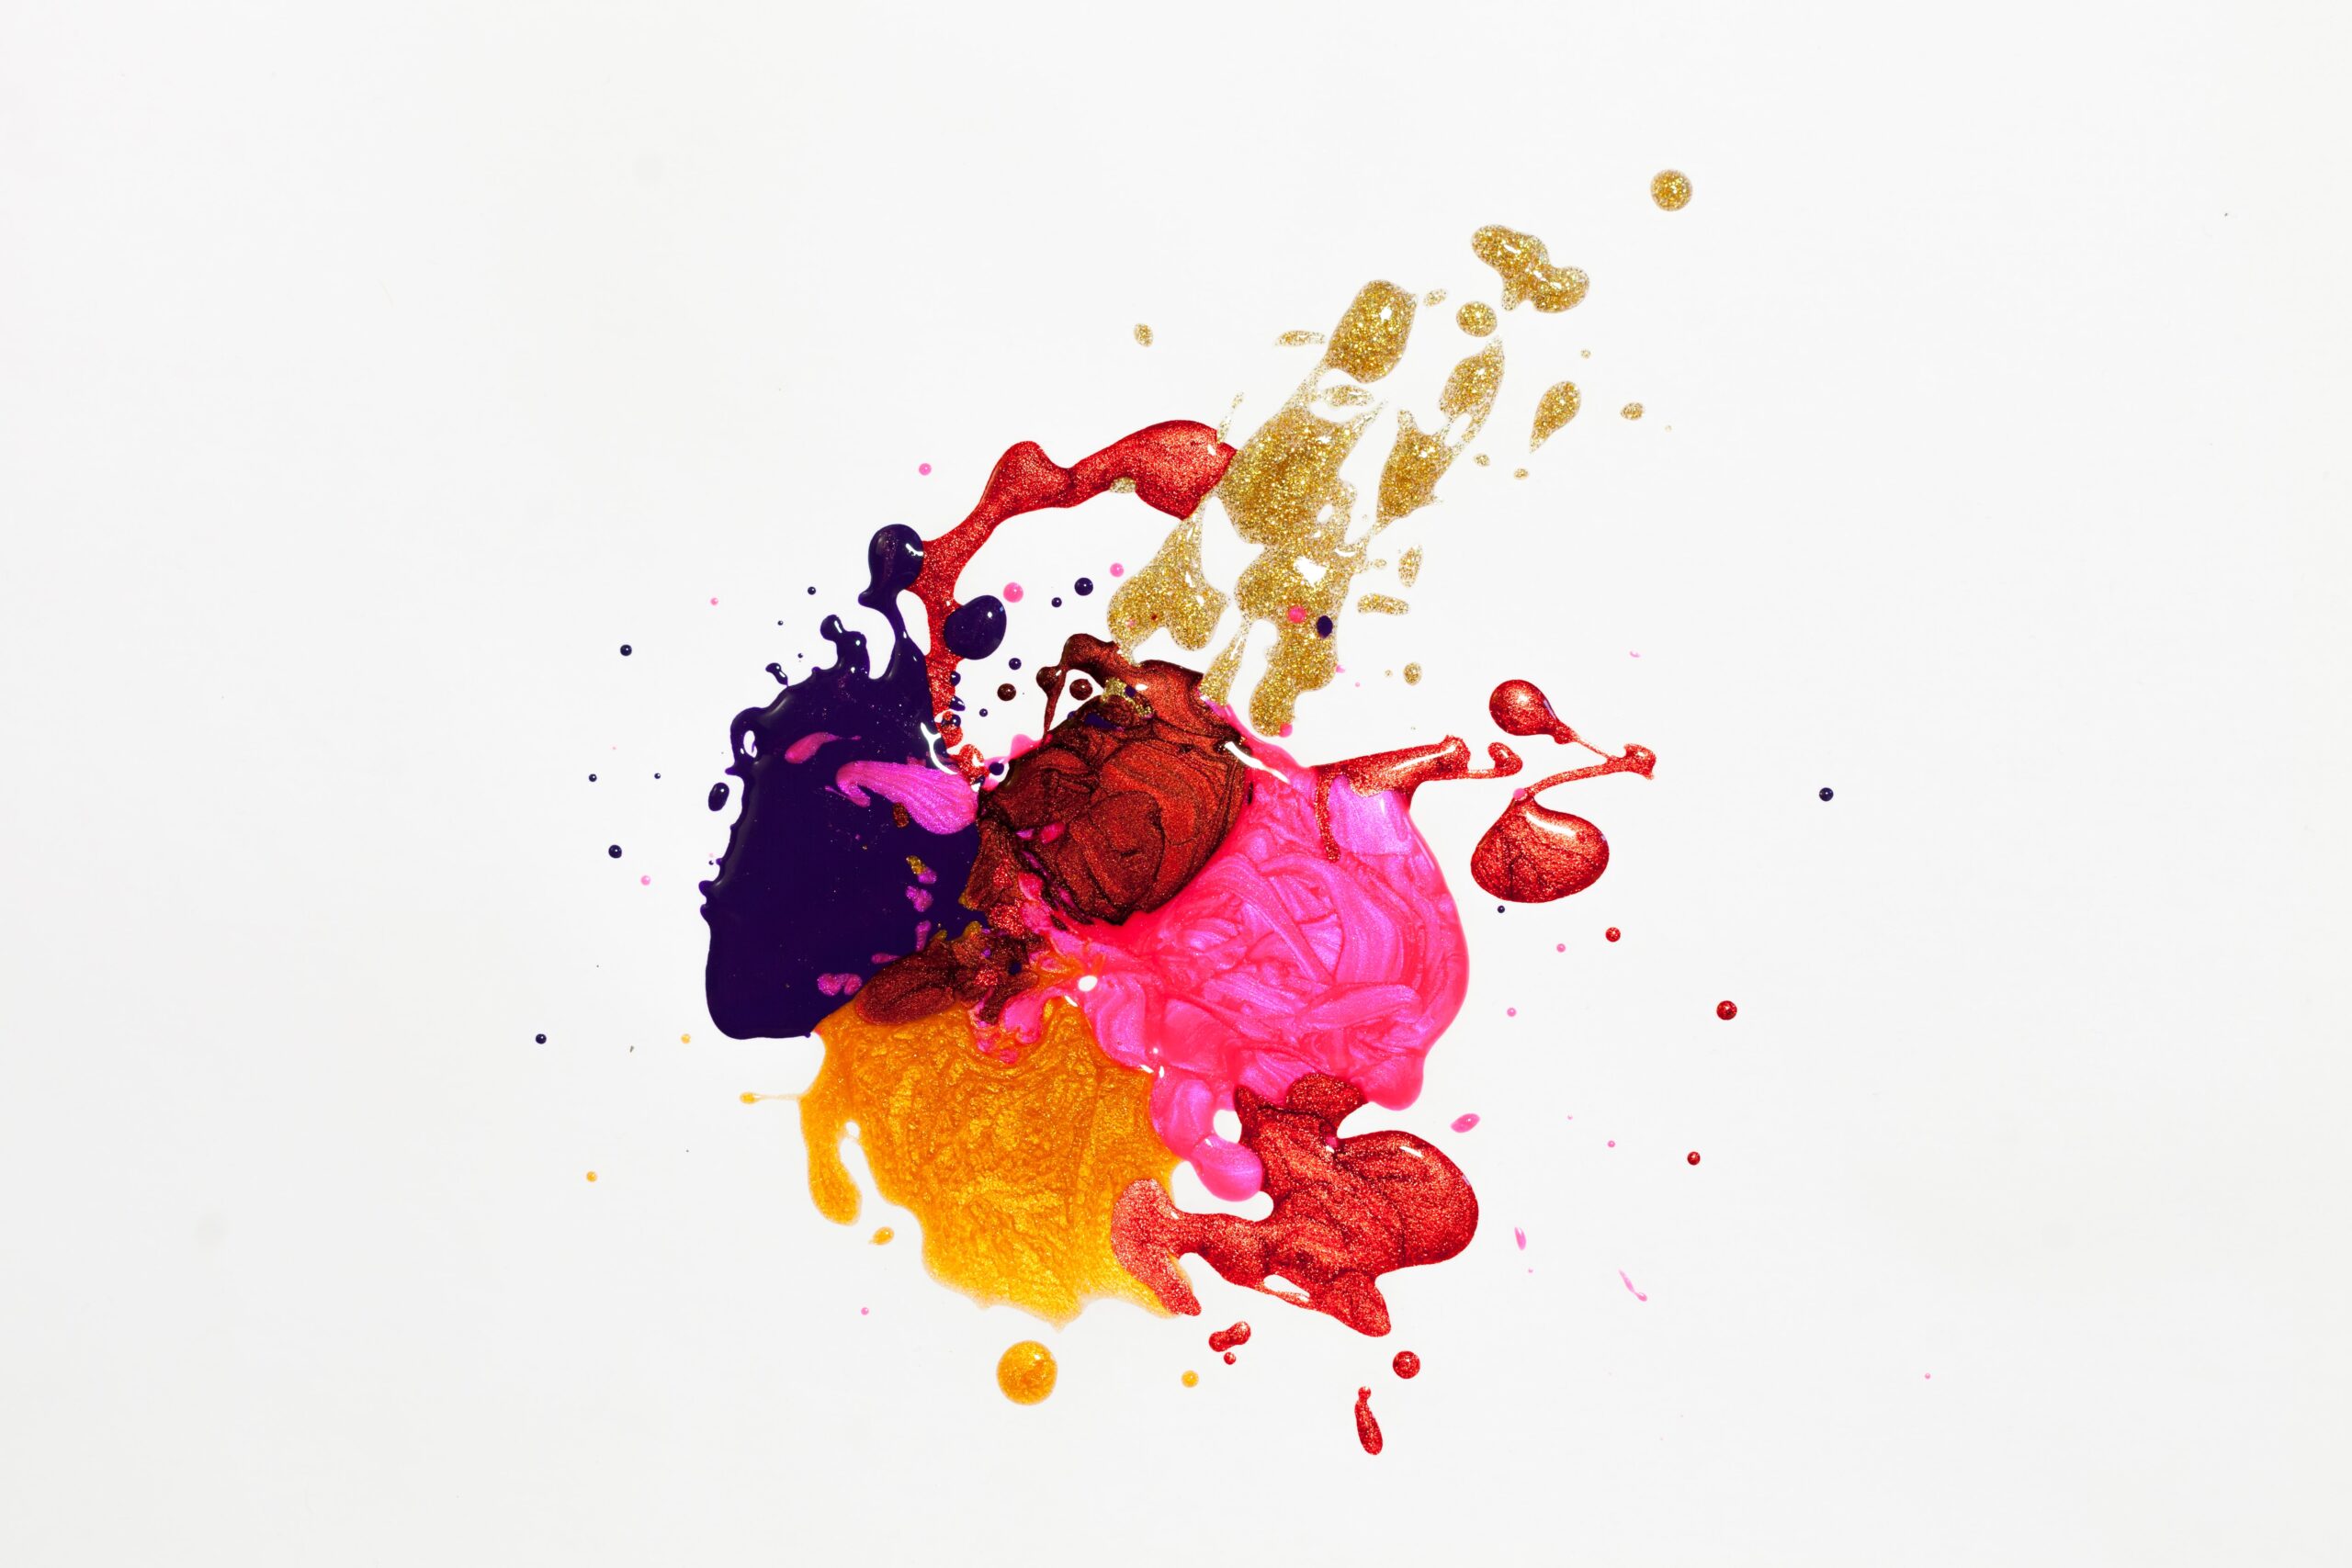 Ink blot with yellow, red, pink, blue, gold, and orange paint to look like stains